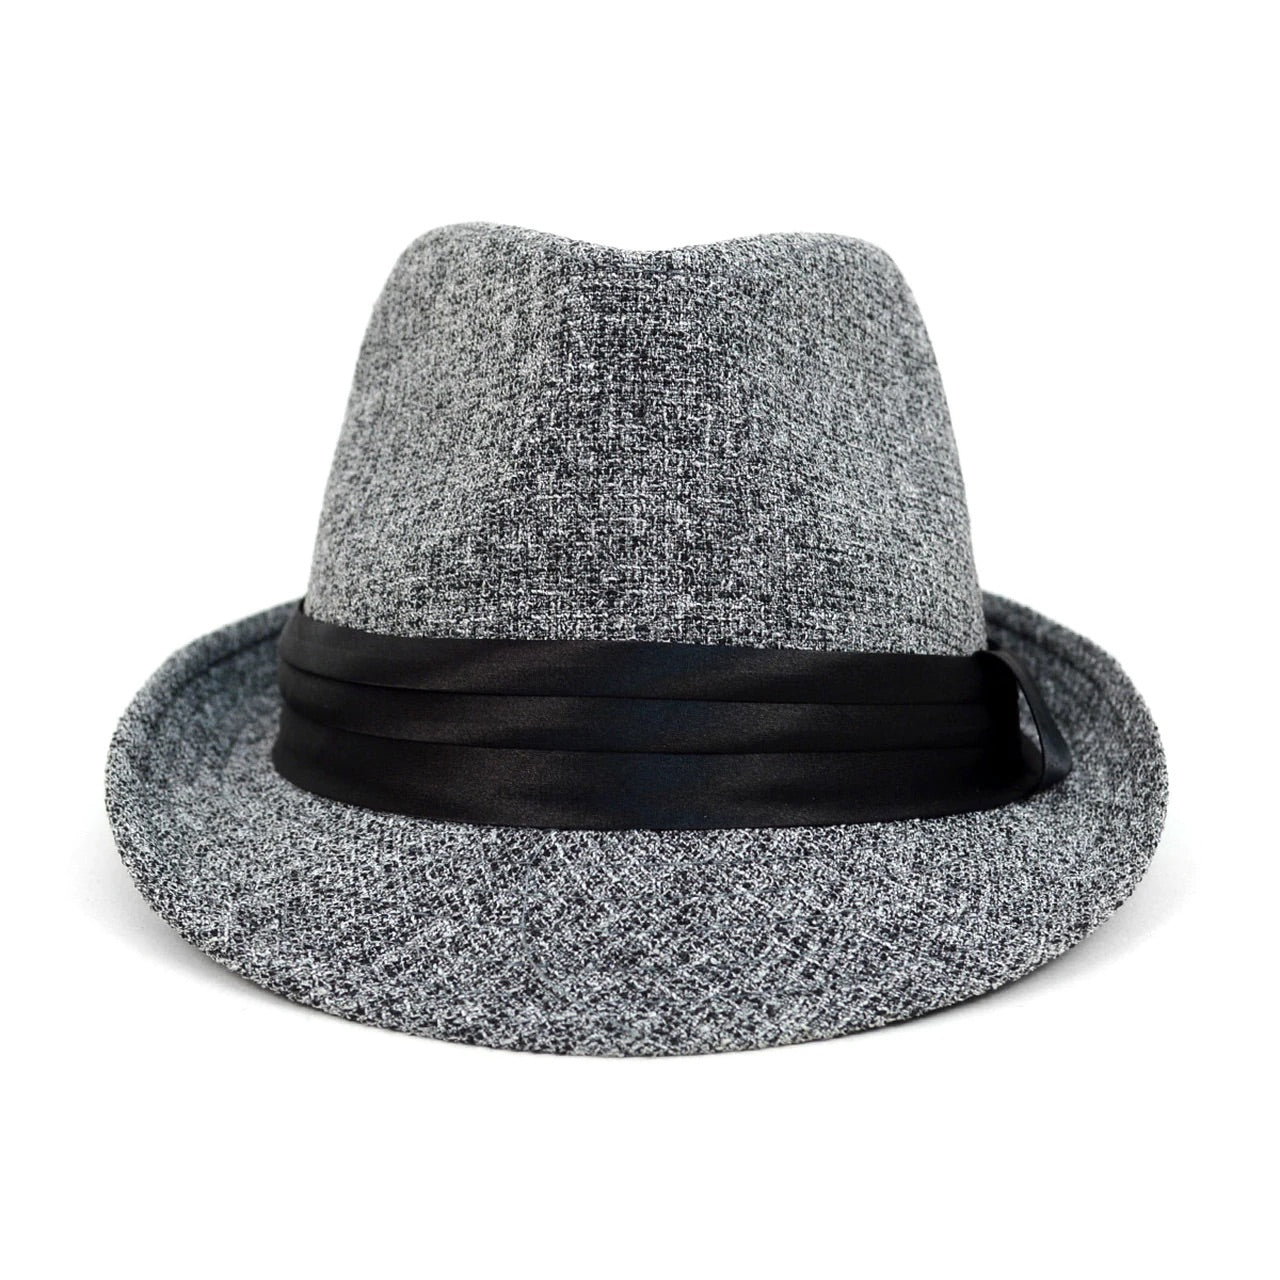 Men’s Fedora Hat-H1805018 - Church Suits For Less